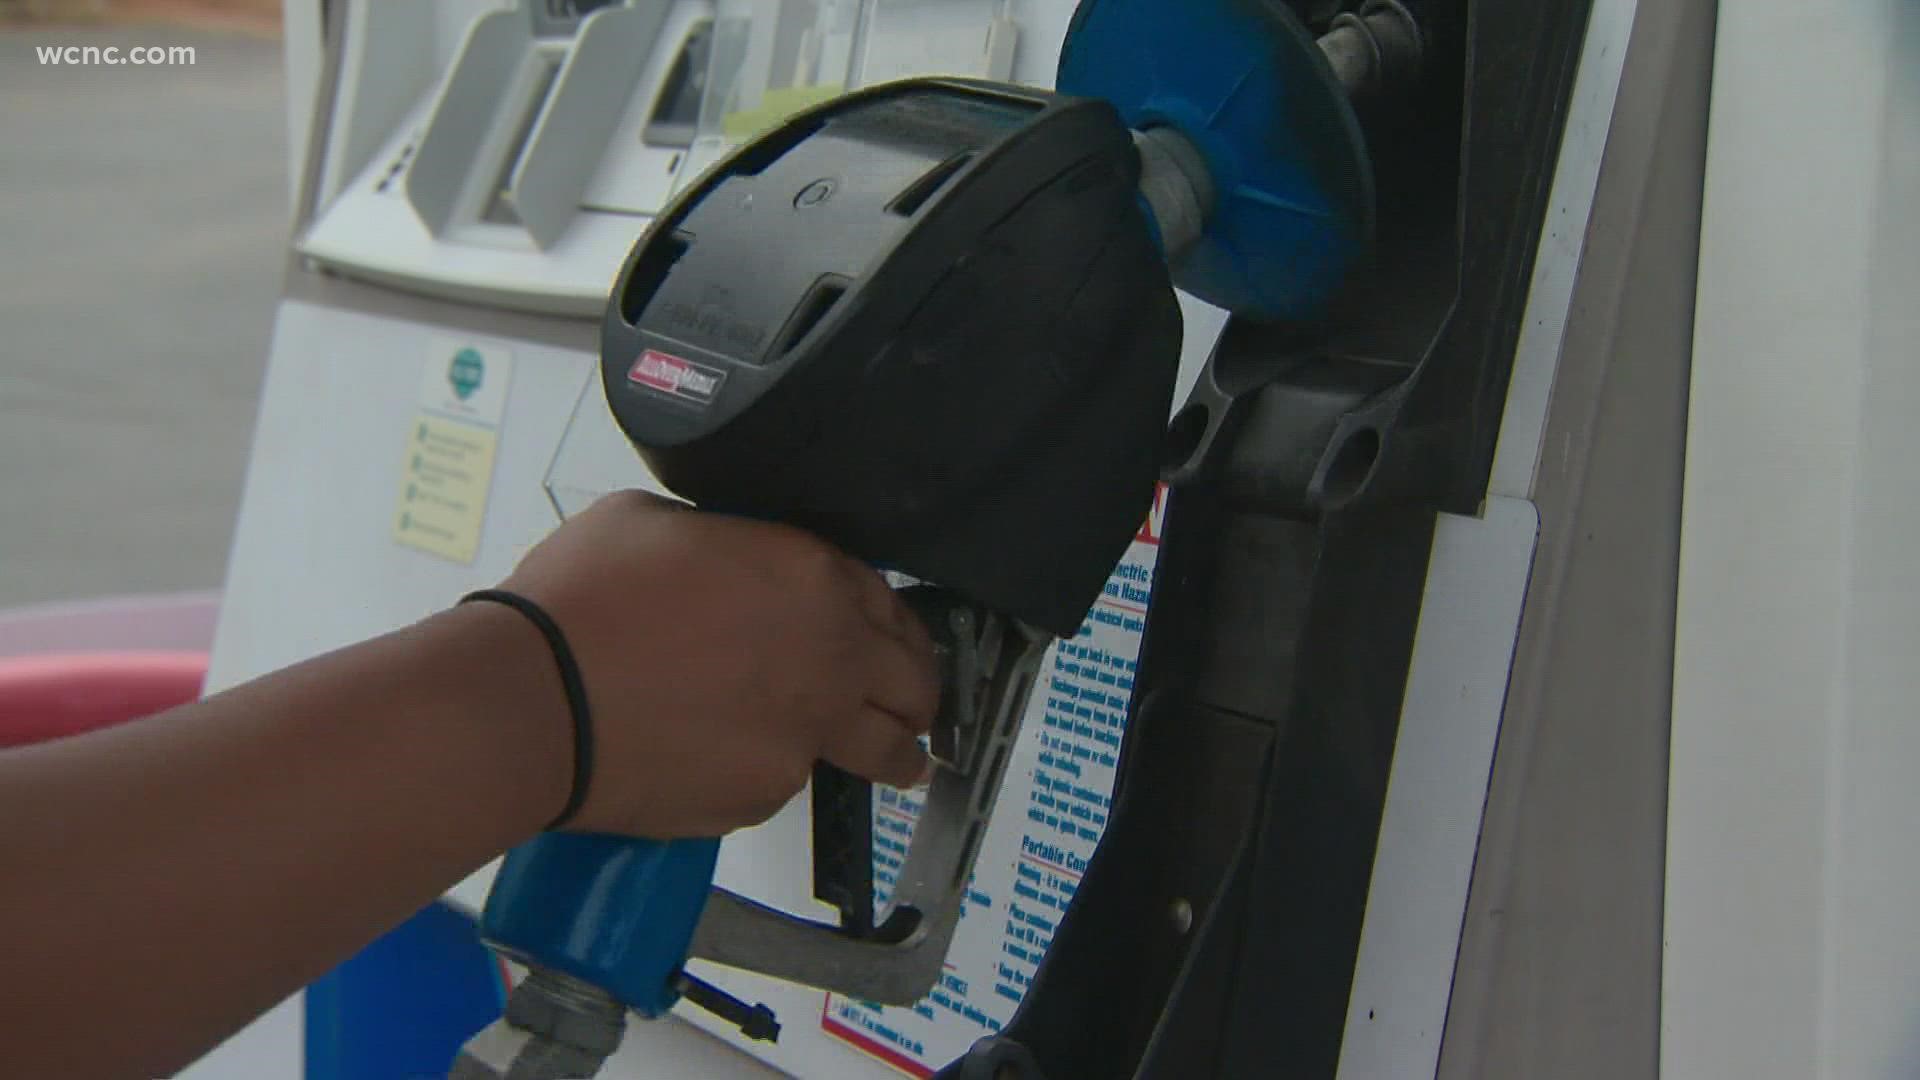 According to AAA, the national average price for a gallon of gas is $3.52, that's 5 cents higher than a week prior.